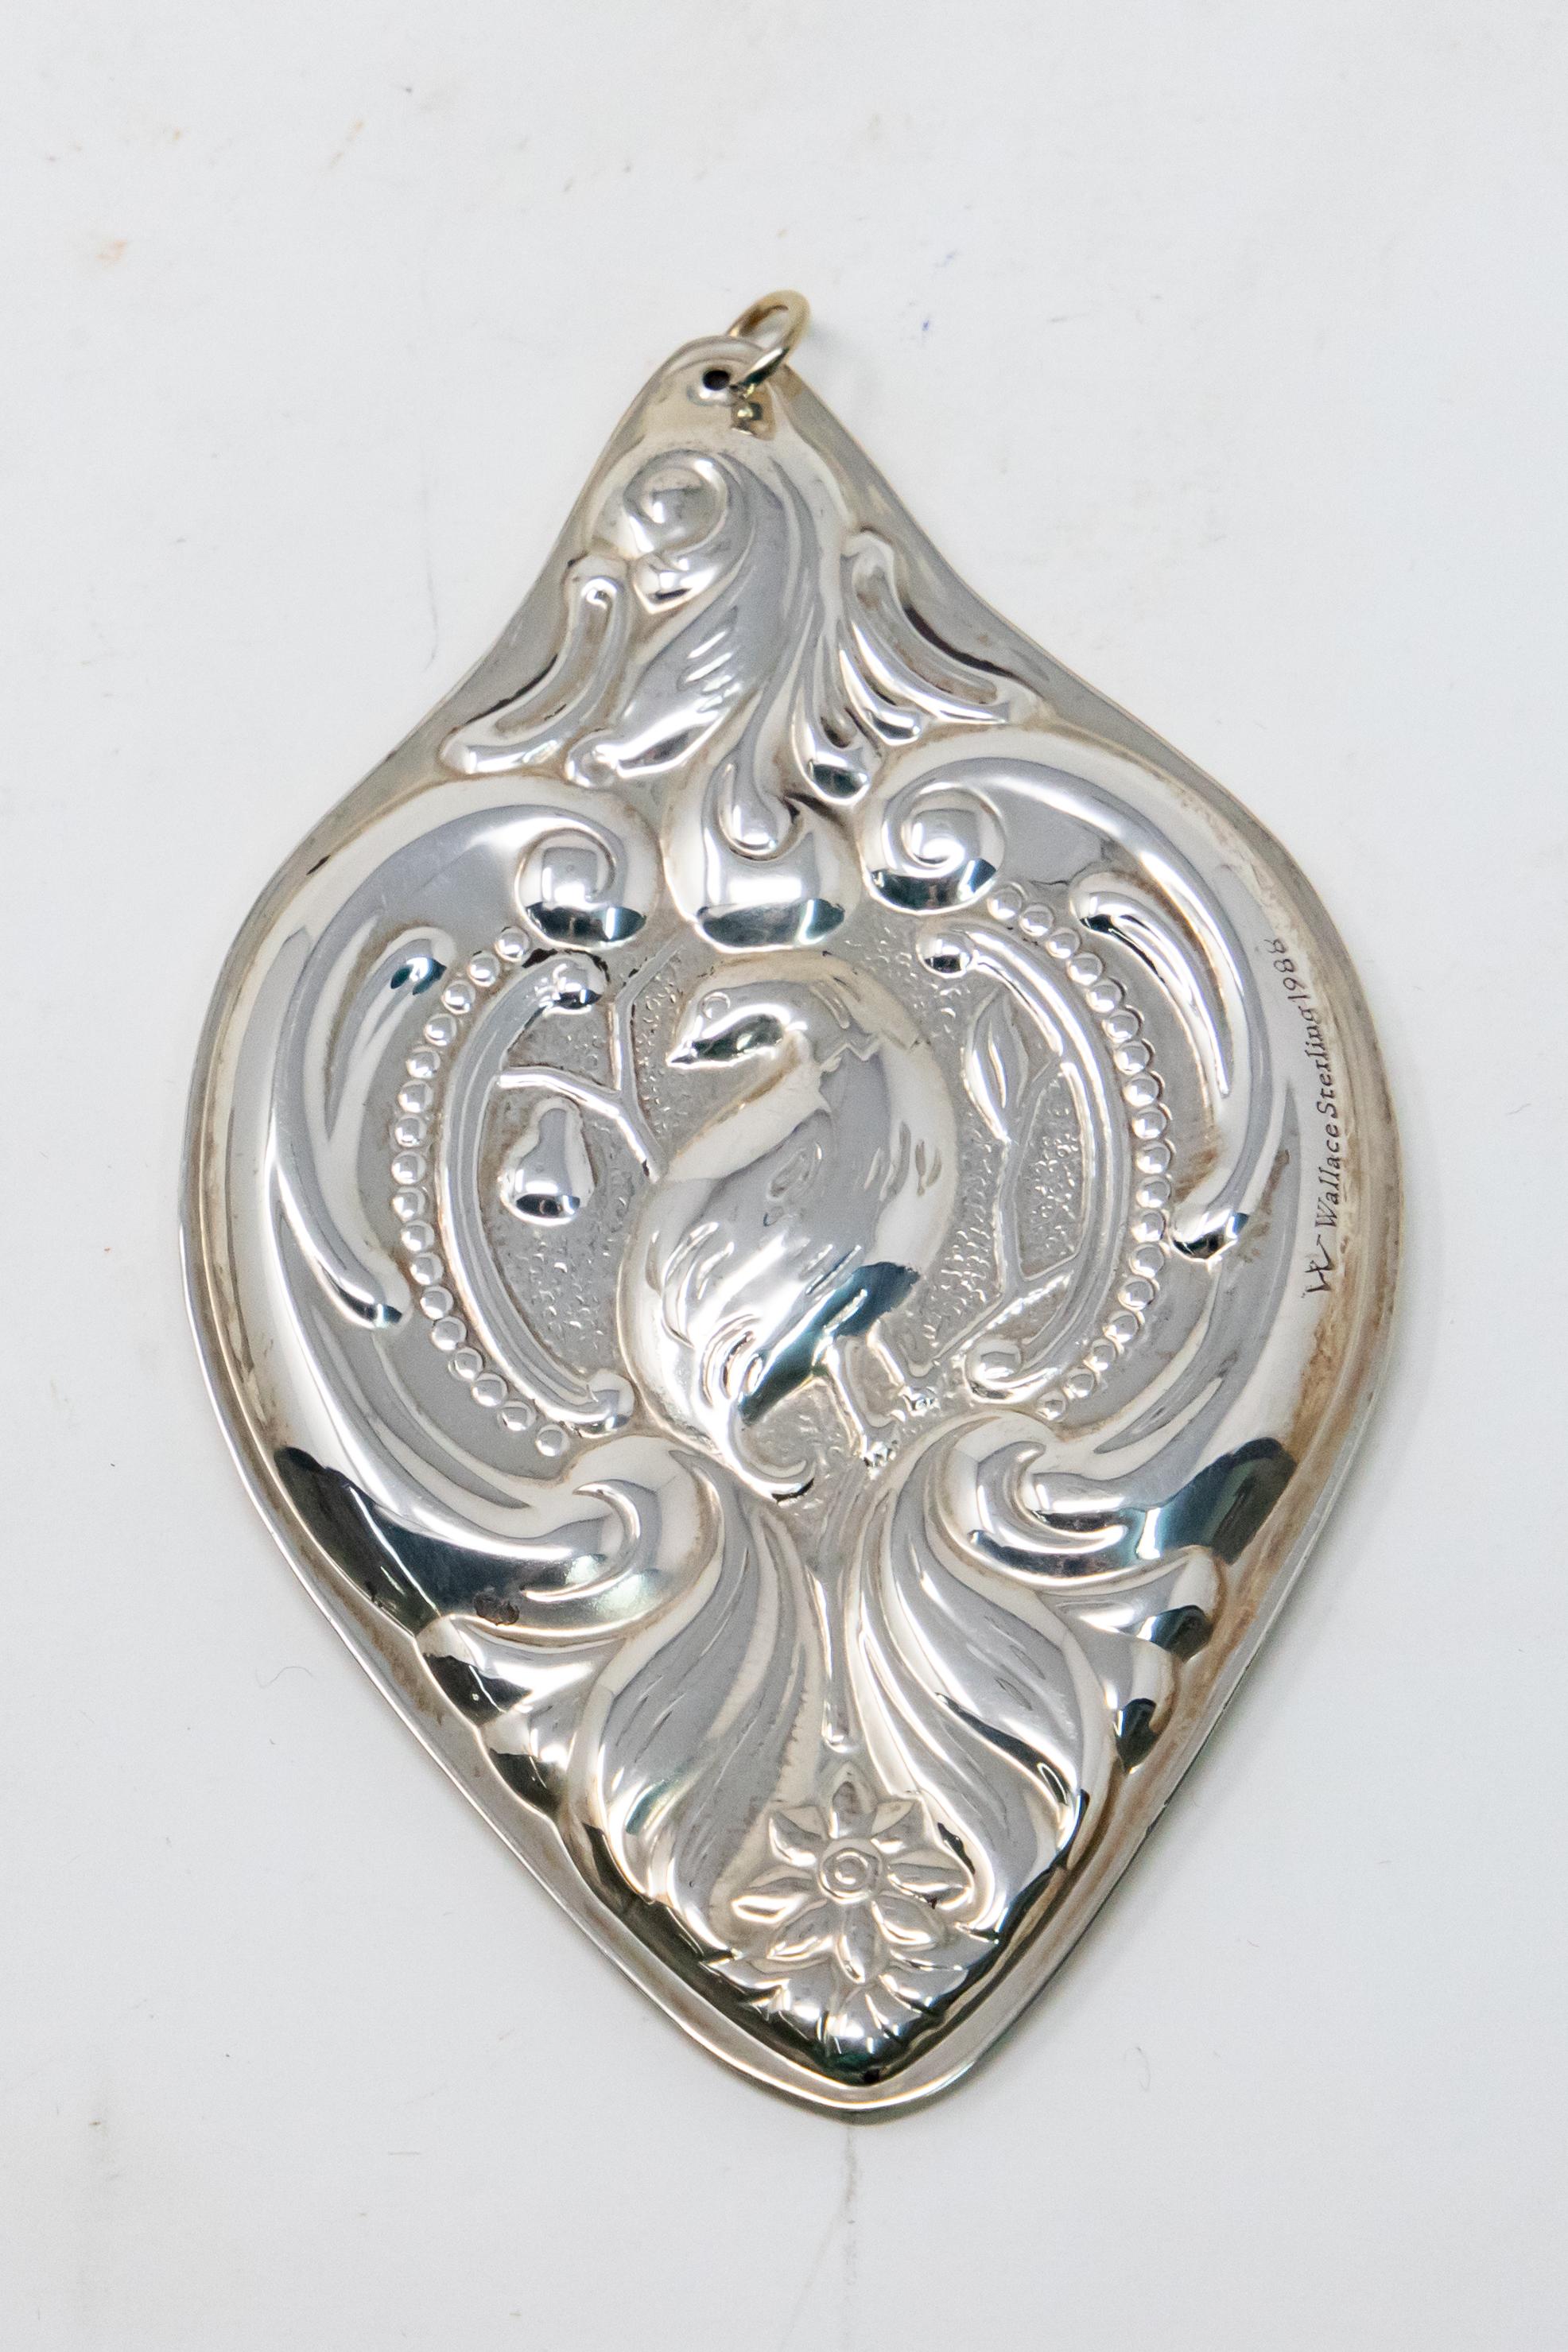 Offering this beautiful Wallace Sterling ornament from 1988. Depicting a Partridge in a Pear Tree in the center, then having foliate detail around him. Inscribed with Wallace Sterling 1988 on the side.